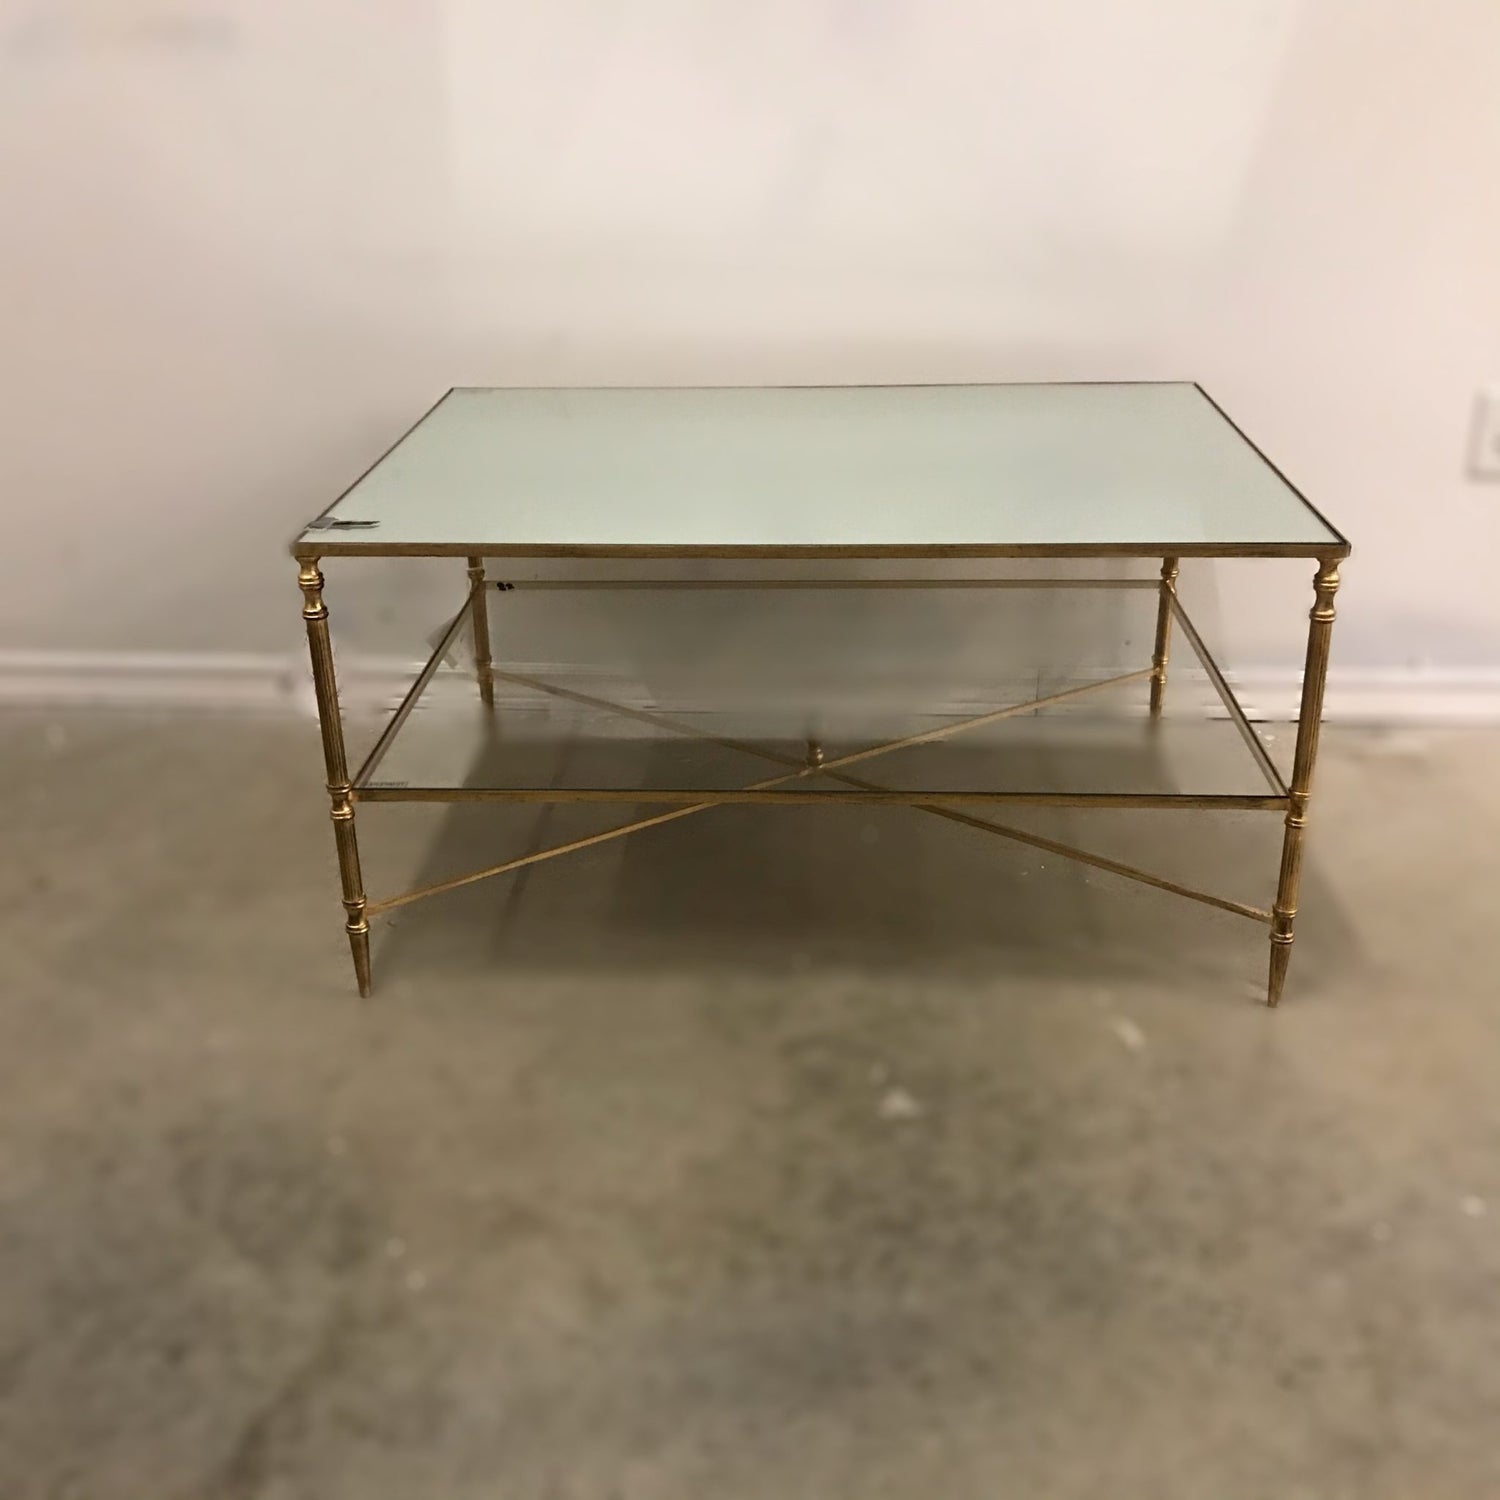 HENZLER COFFEE TABLE